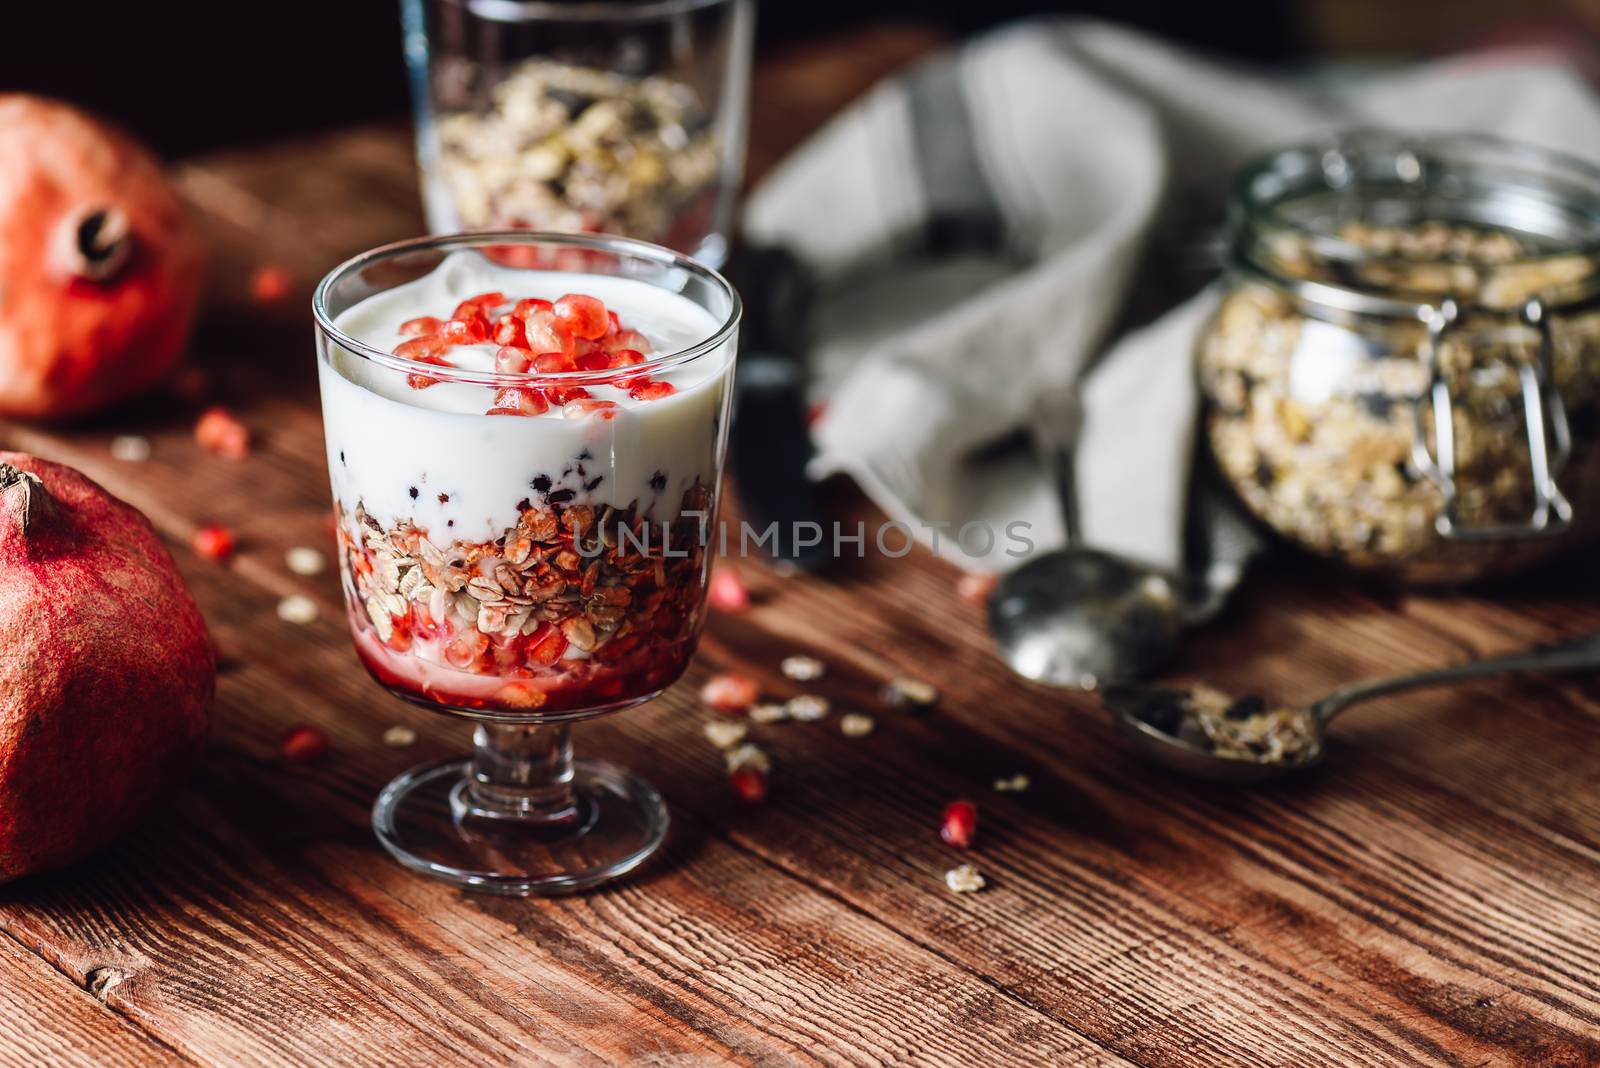 Pomegranate Parfait with Ingredients on Backdrop. Series on Prepare Healthy Dessert with Pomegranate, Granola, Cream and Jam.